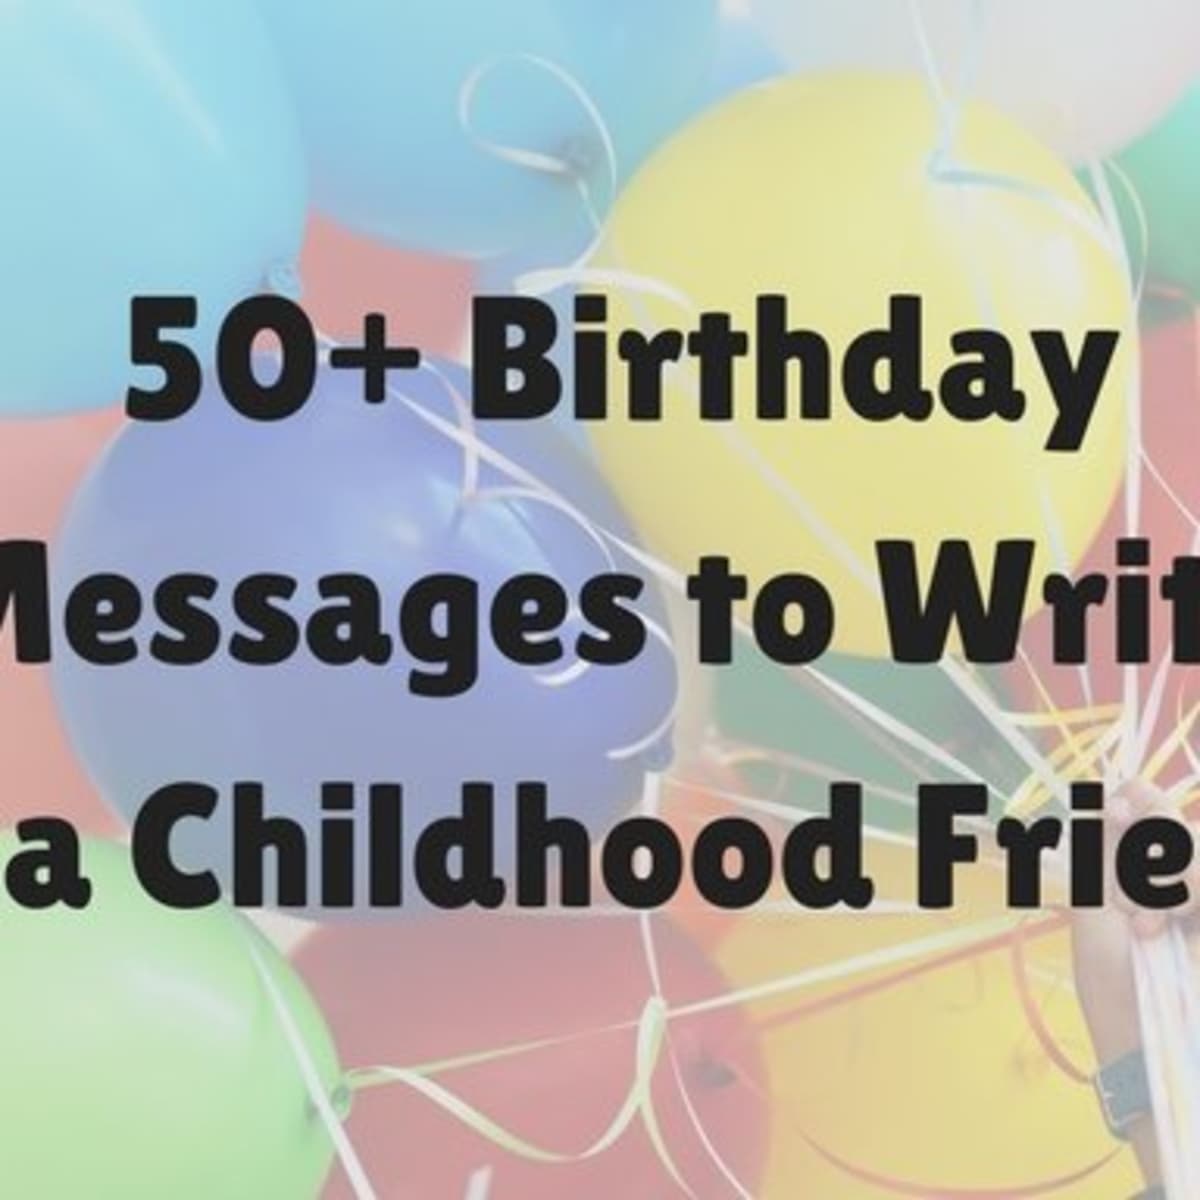 50+ Birthday Wishes for Childhood Friends - Holidappy